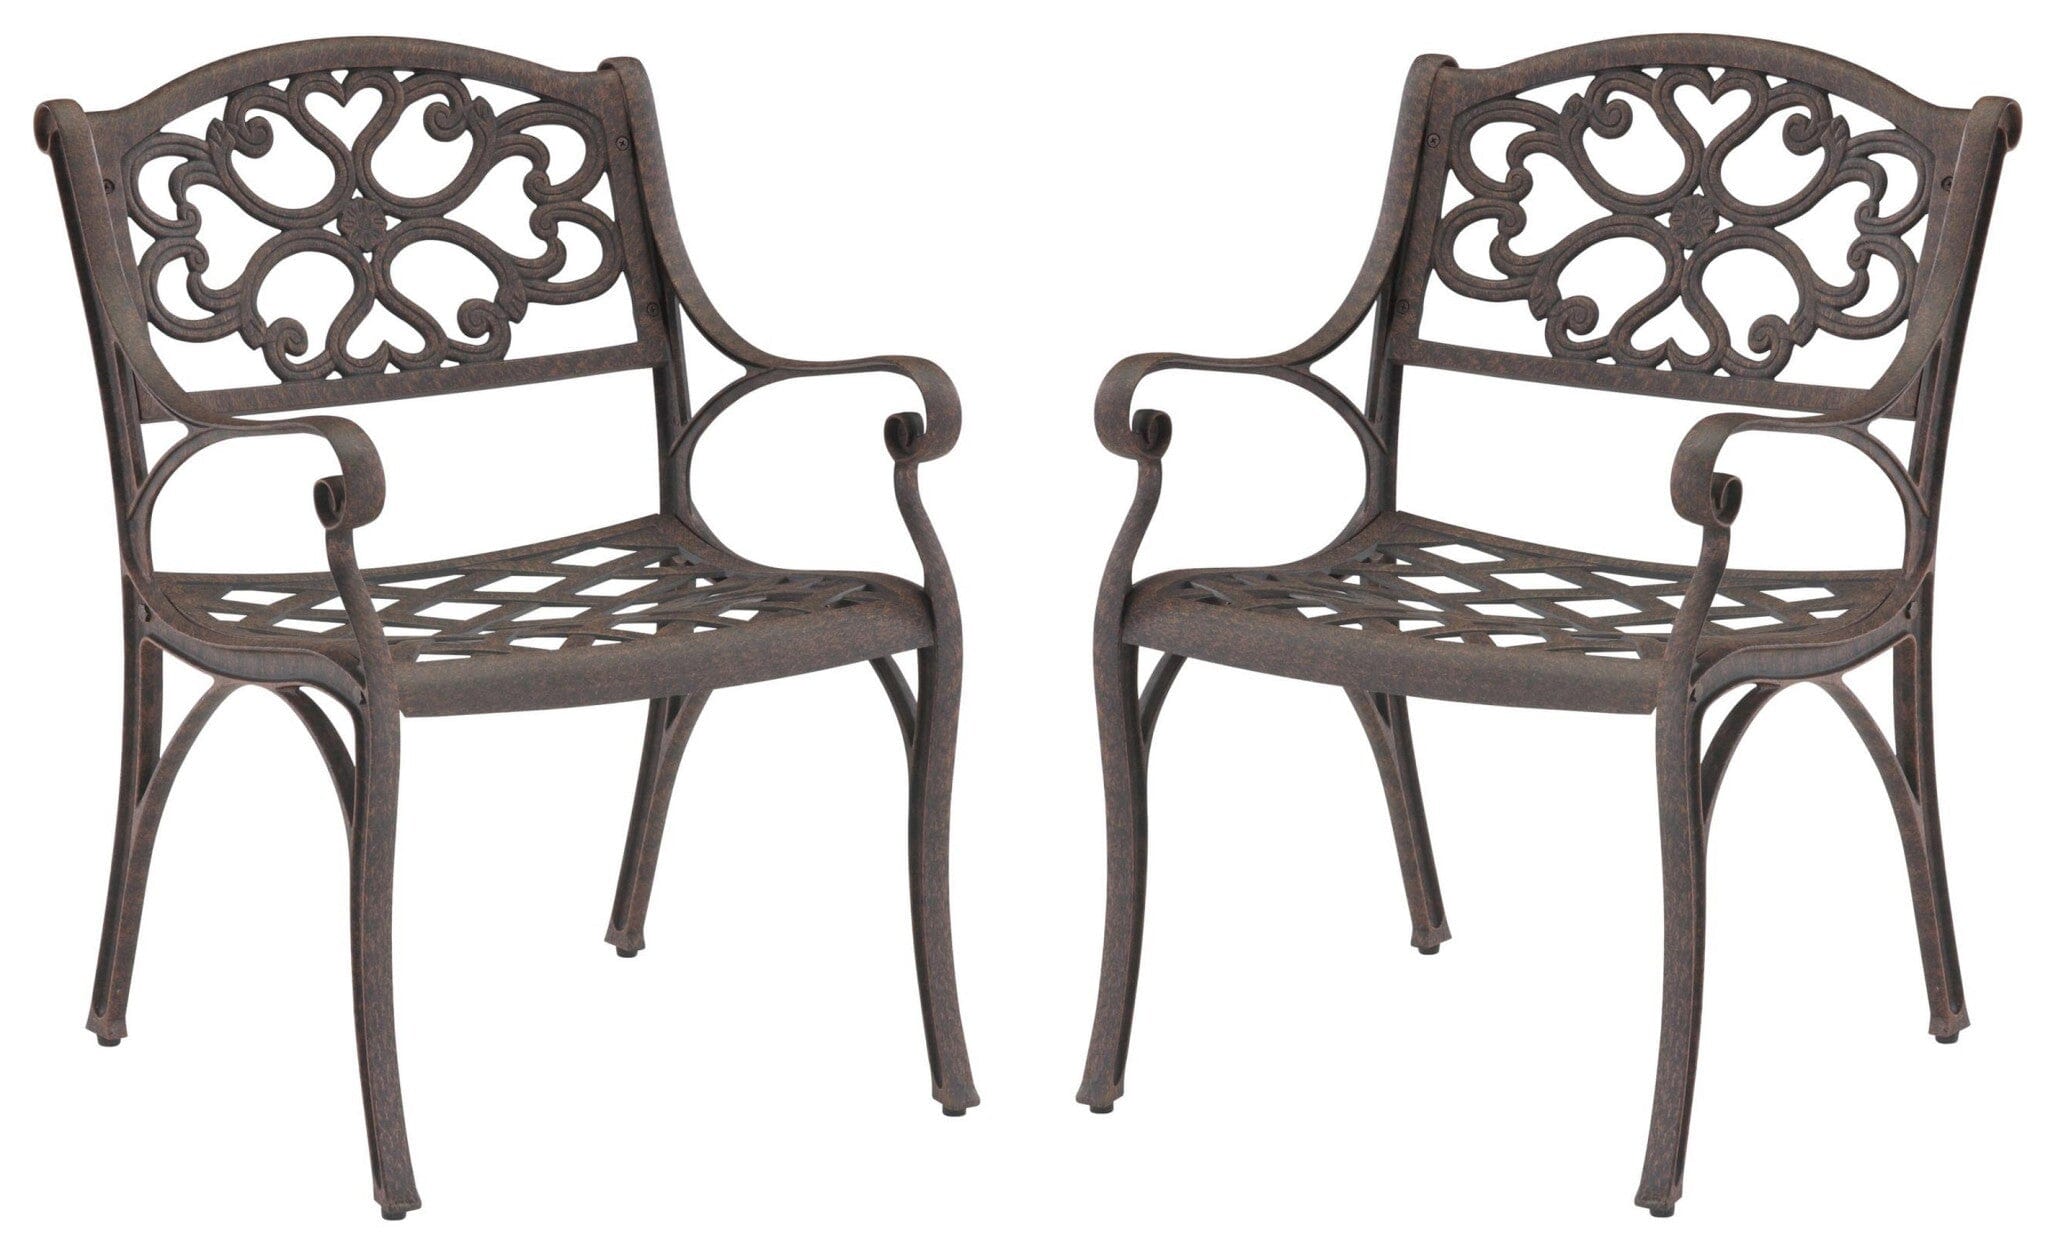 Traditional Outdoor Chair Pair By Sanibel Outdoor Chair Sanibel